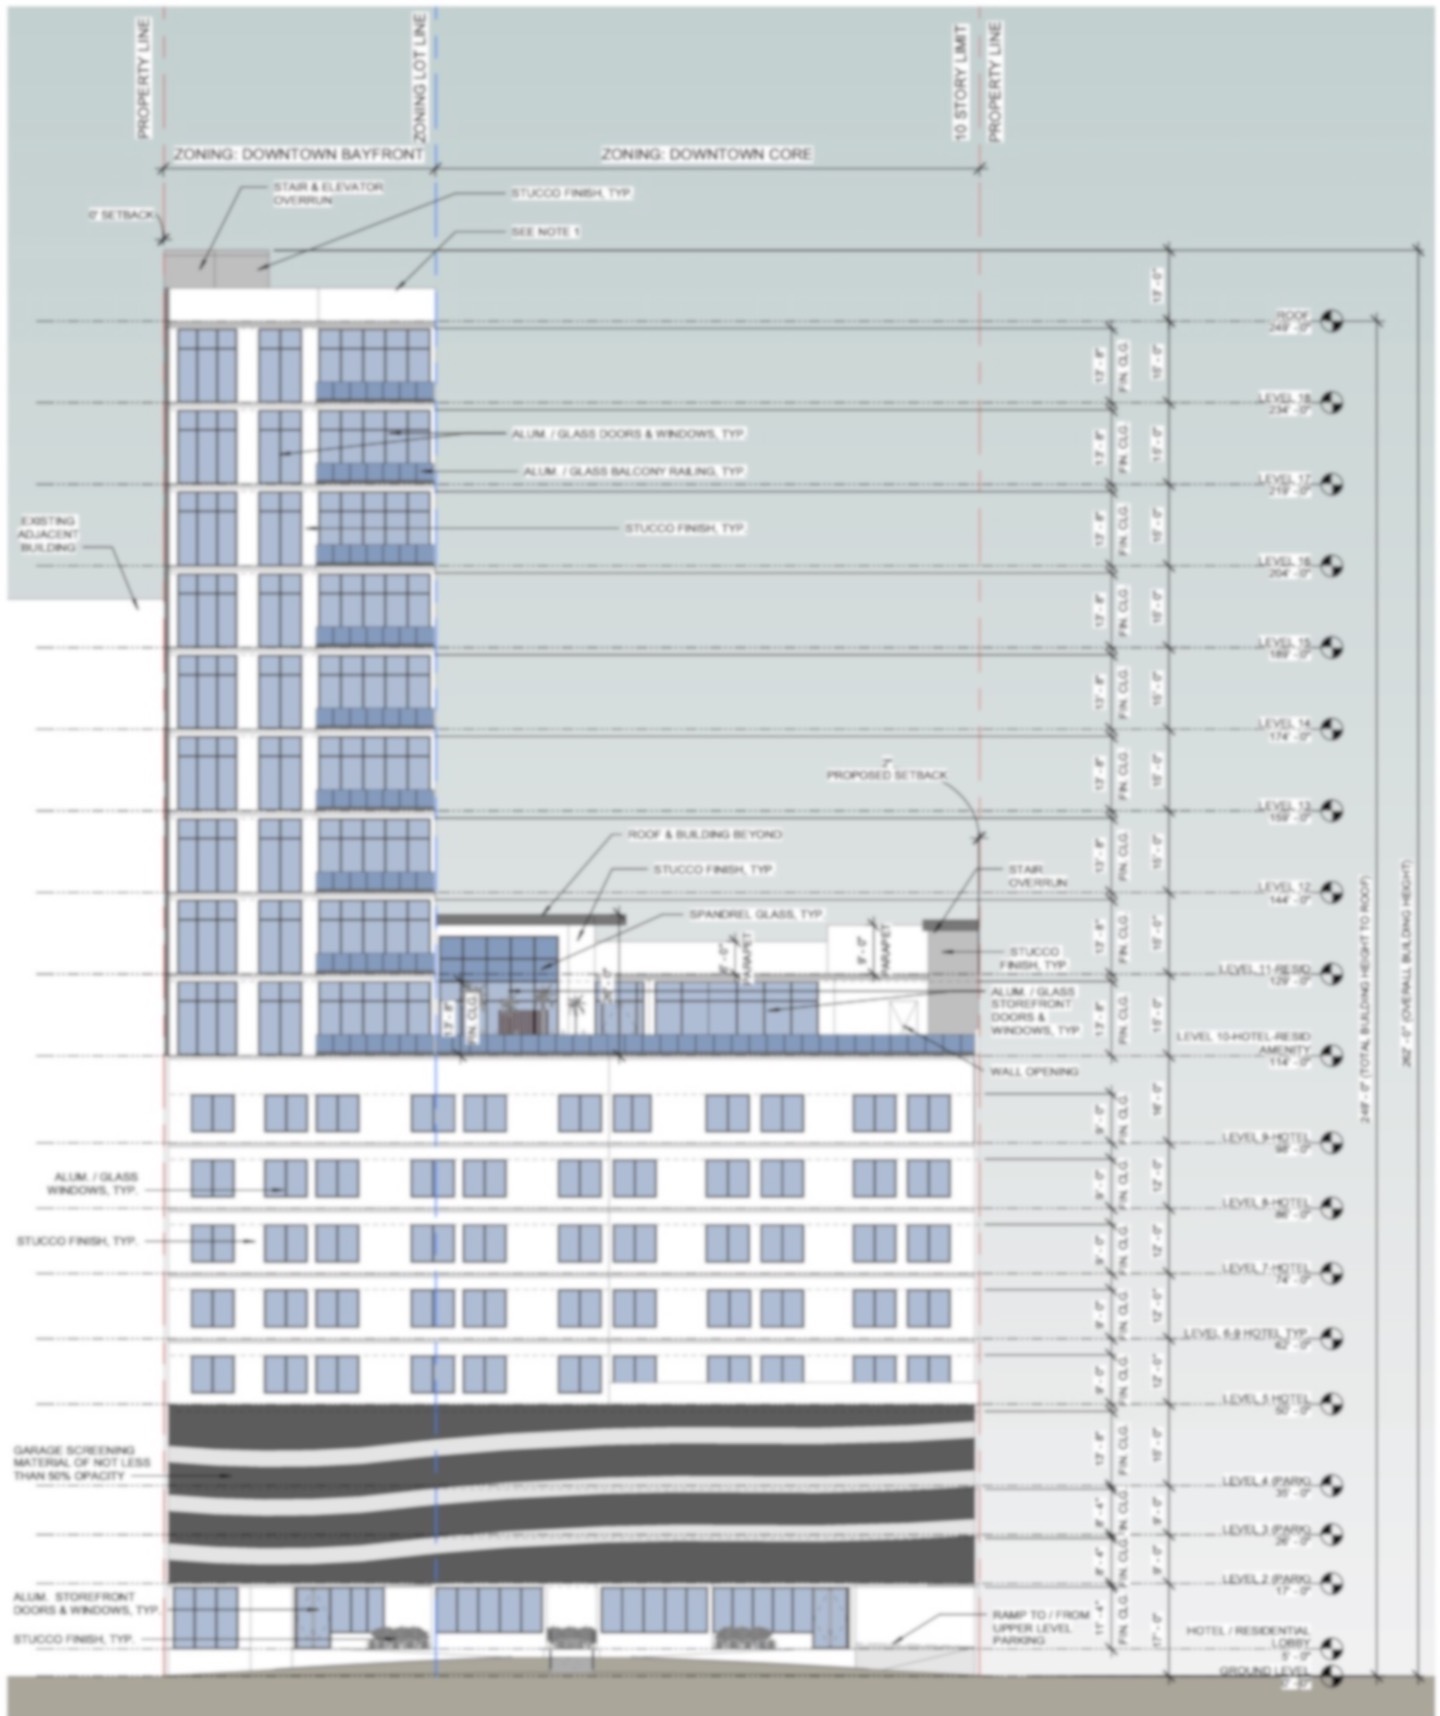 The design by Hoyt Architects for 1225 Second Street shows nine floors of condominiums above 10 stories of hotel and parking structure. The condo tower is immediately adjacent to the Embassy Suites hotel. (Courtesy rendering)